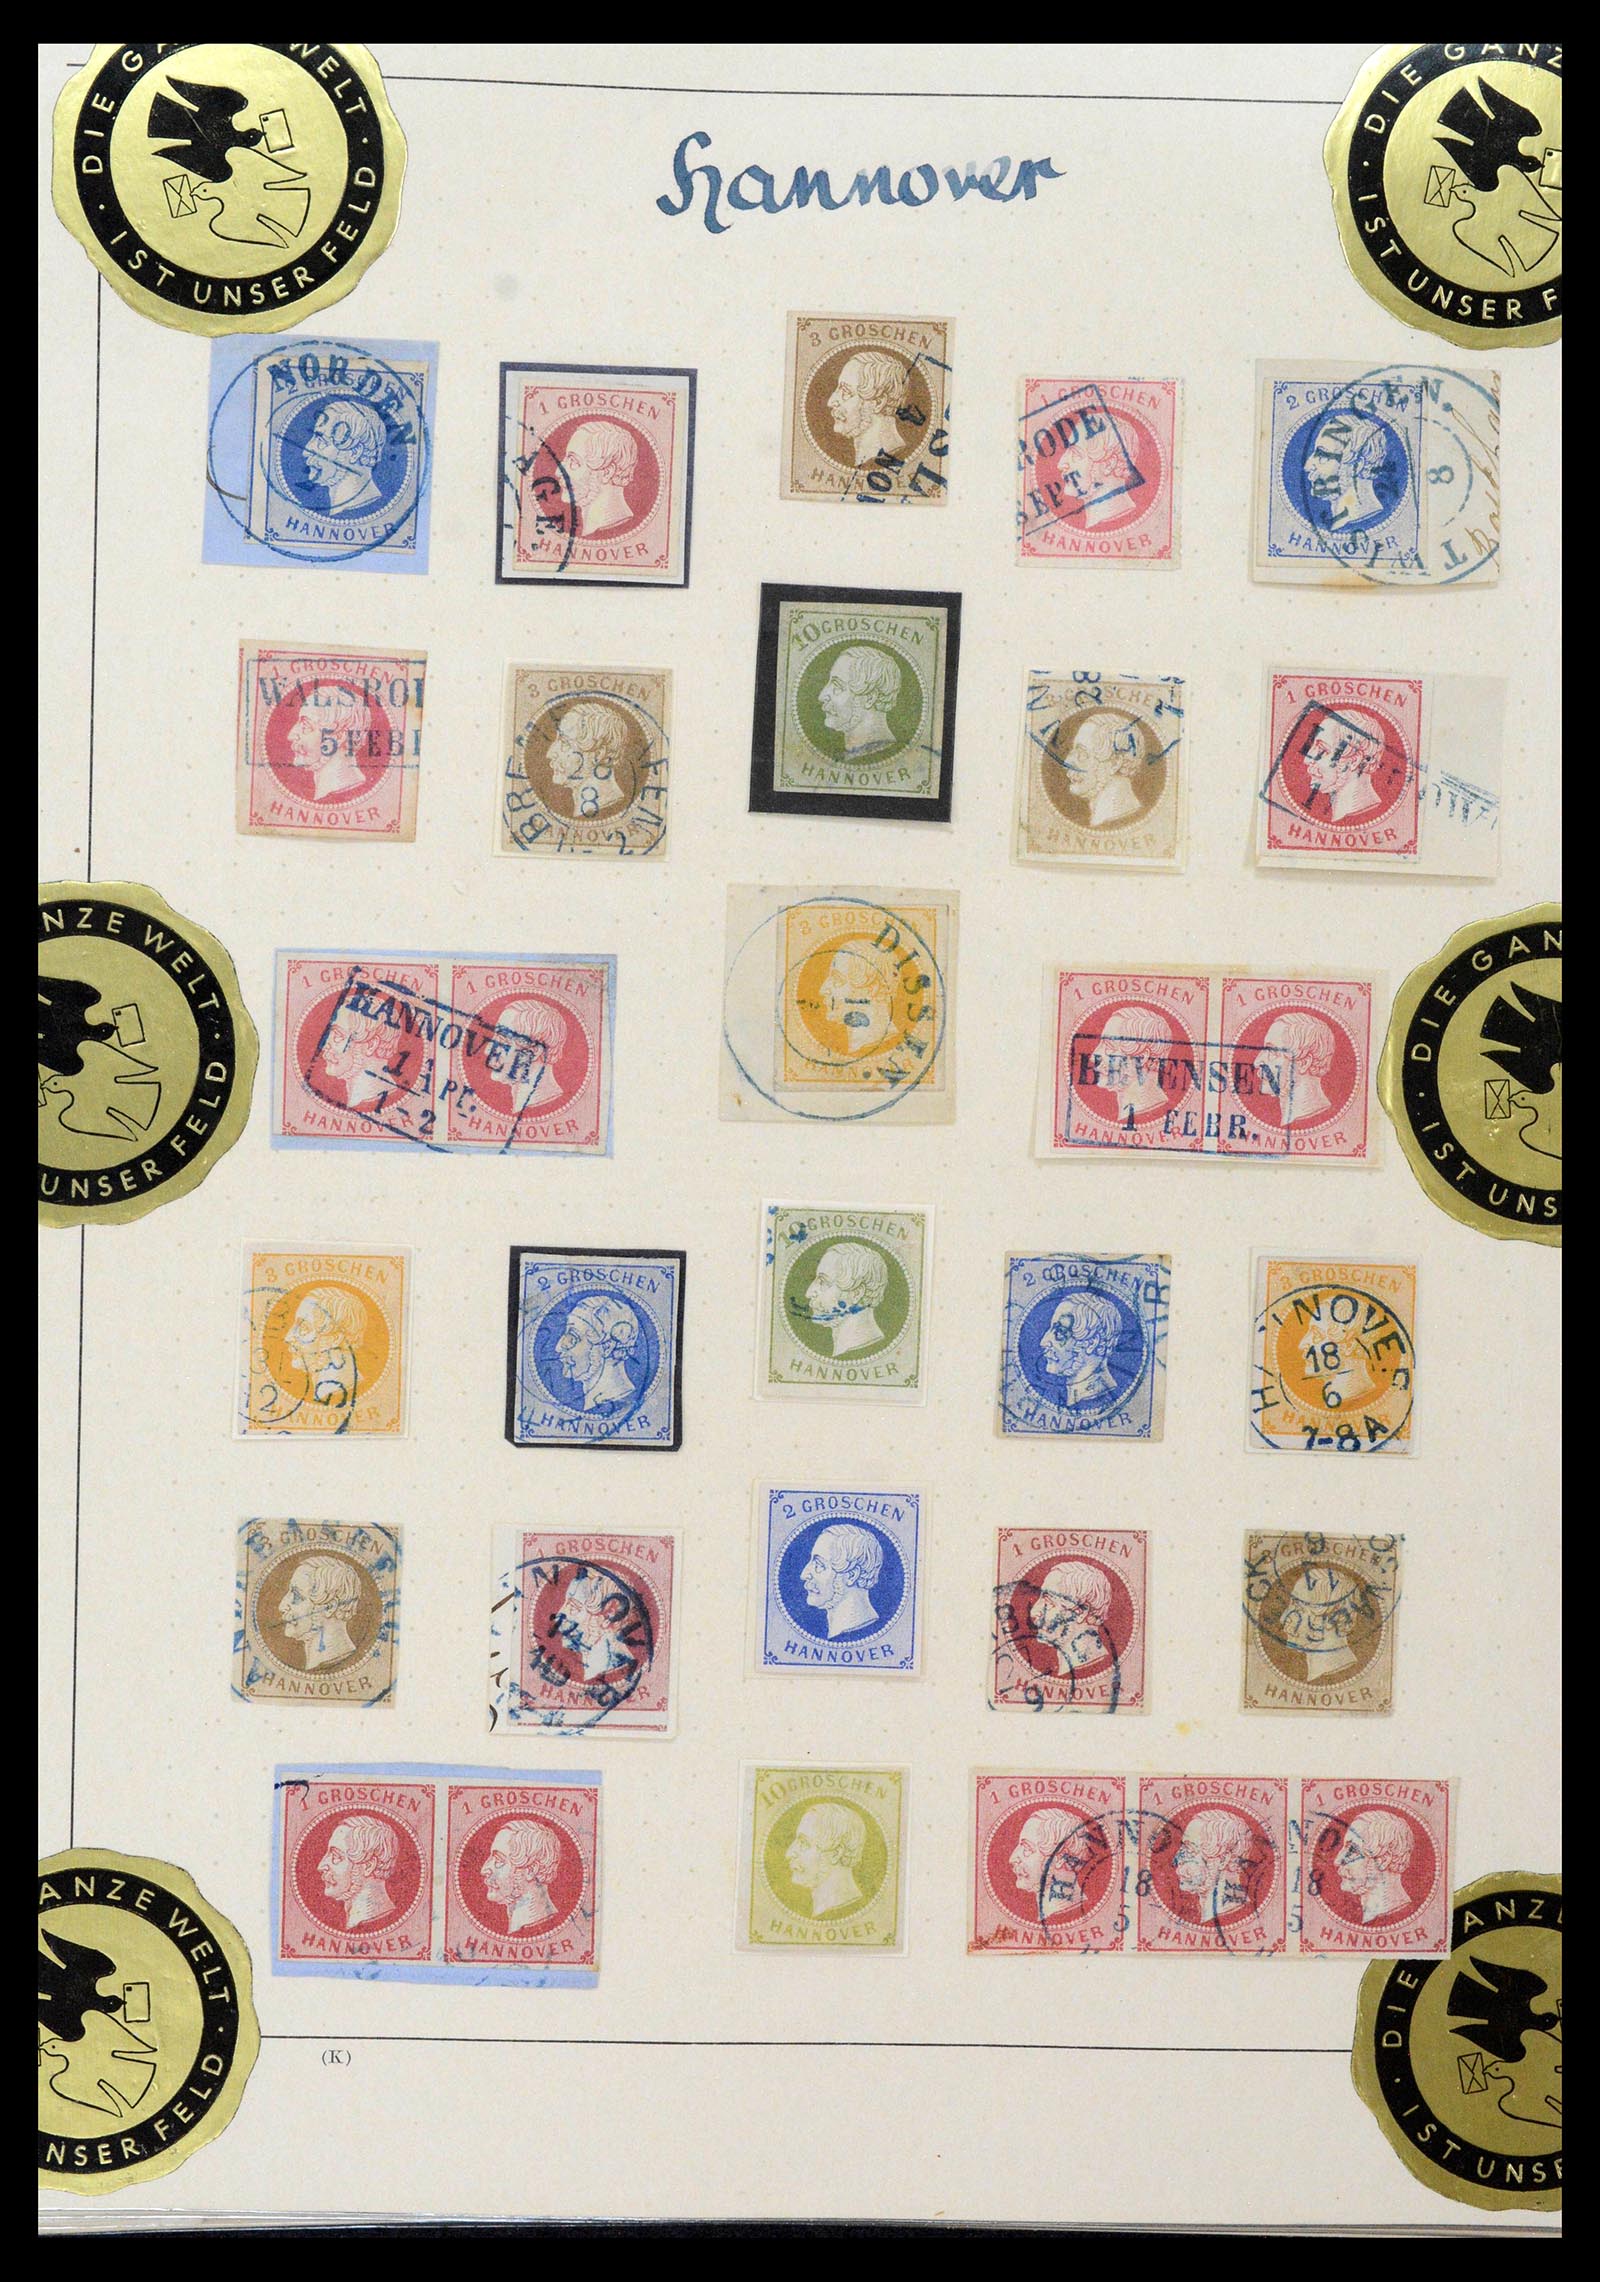 39200 0015 - Stamp collection 39200 Hannover SUPER collection 1850-1864.